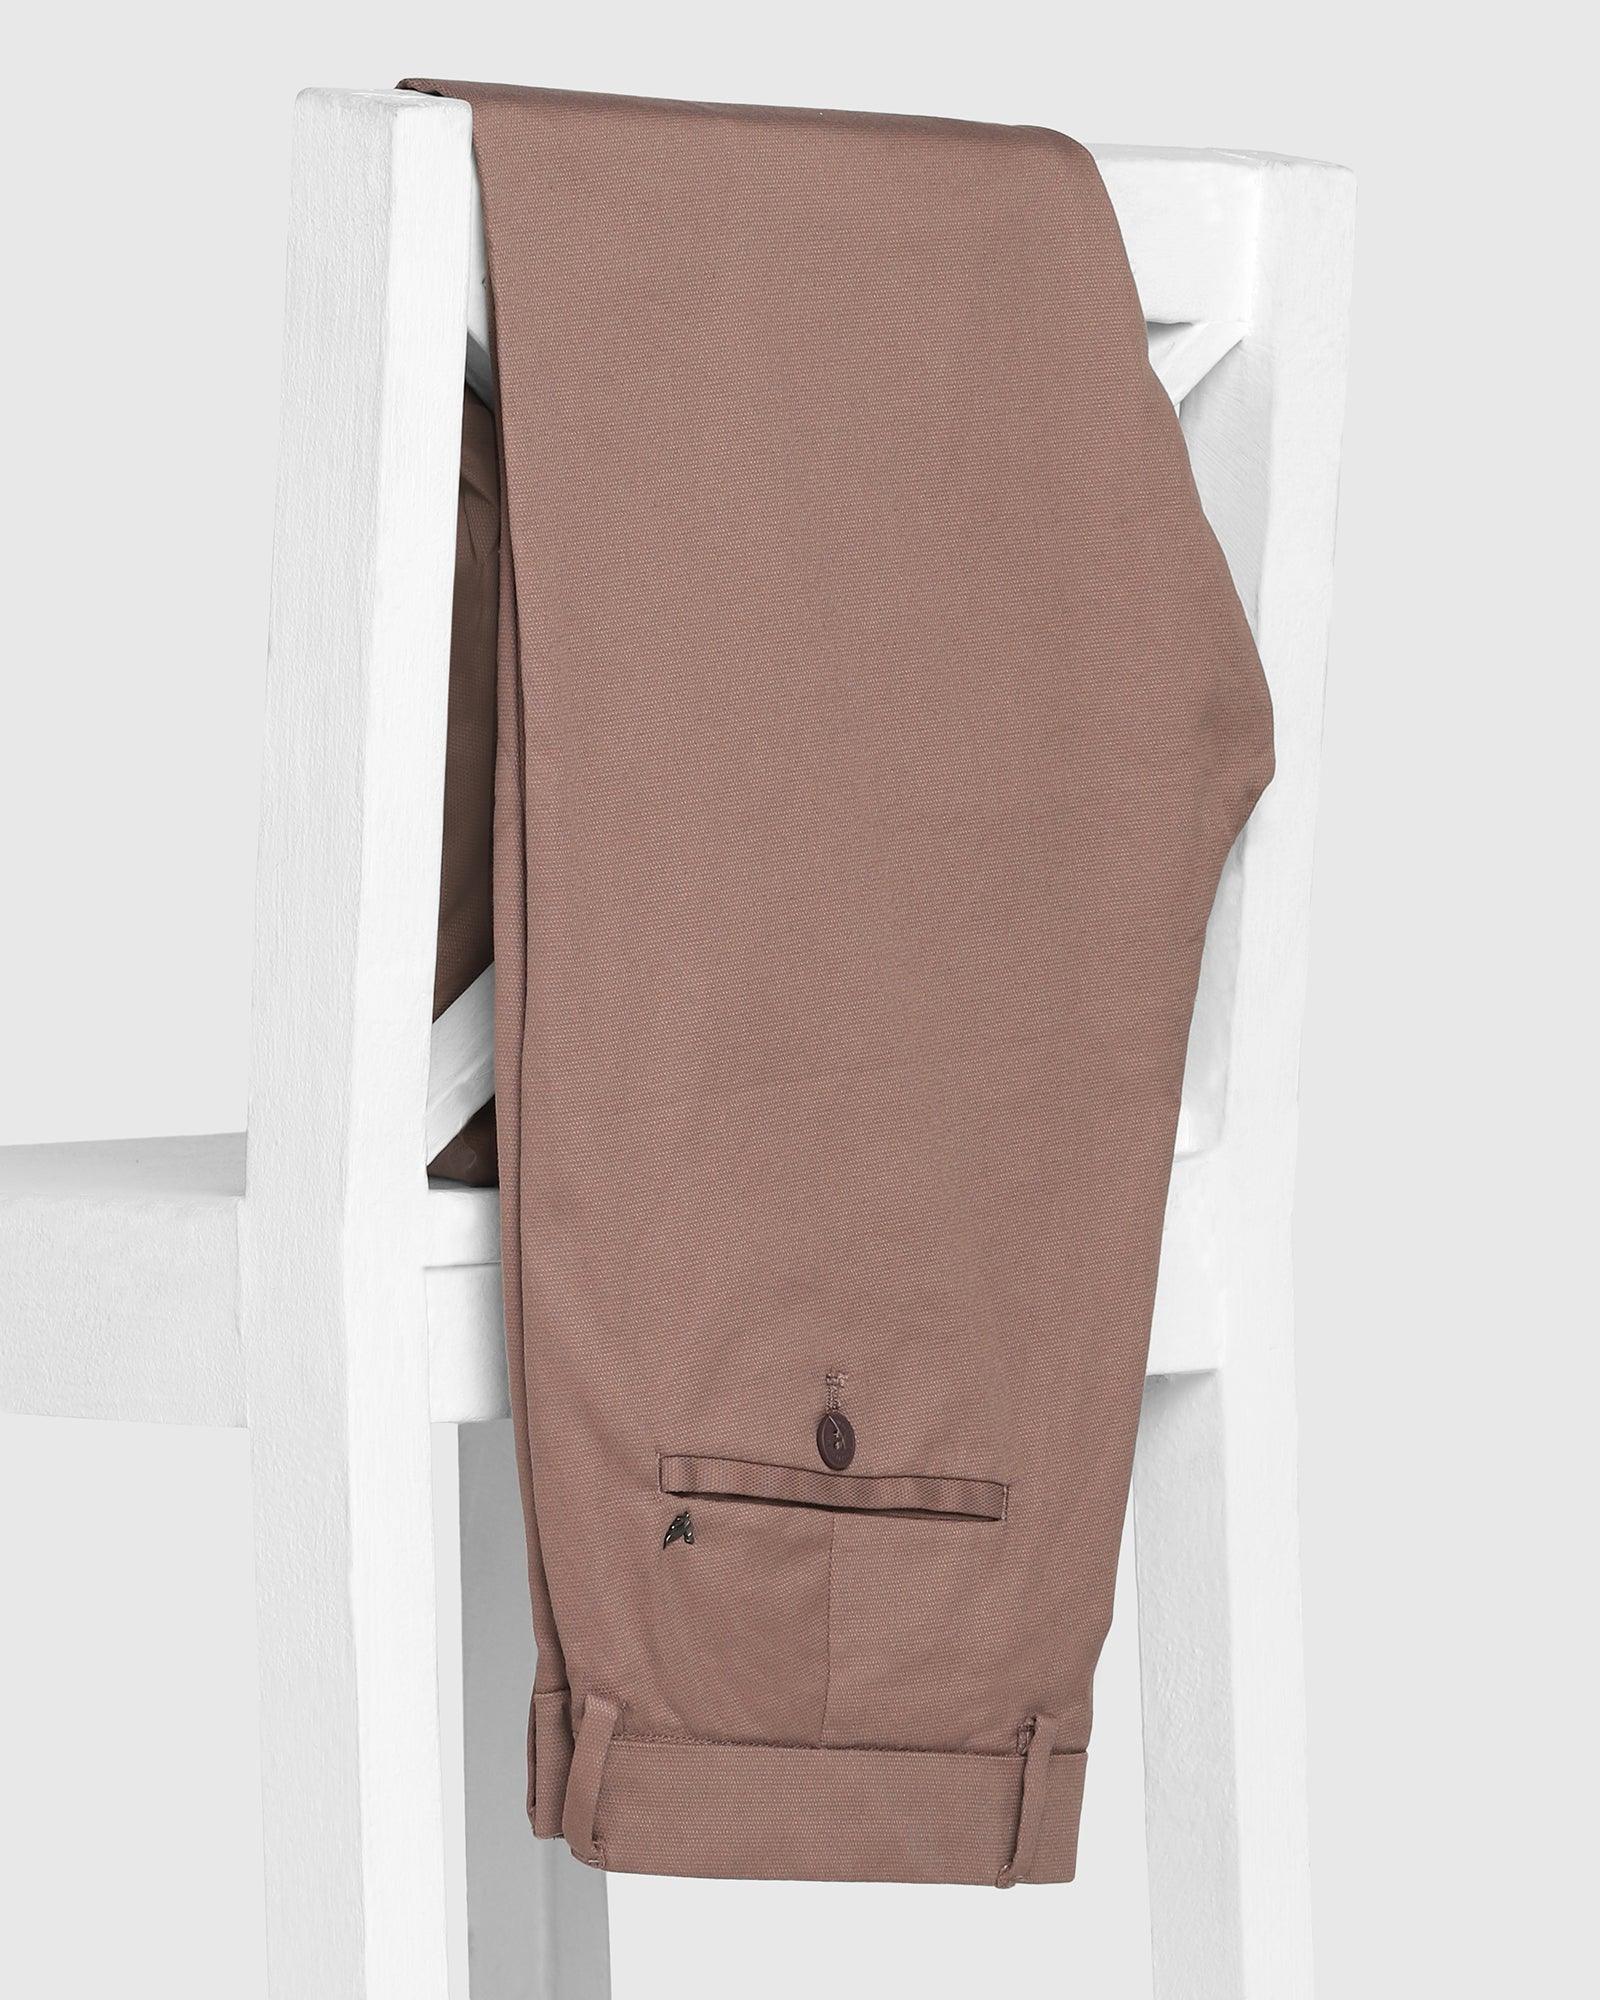 TechPro Slim Fit B-91 Casual Dusty Pink Textured Khakis - Hoag